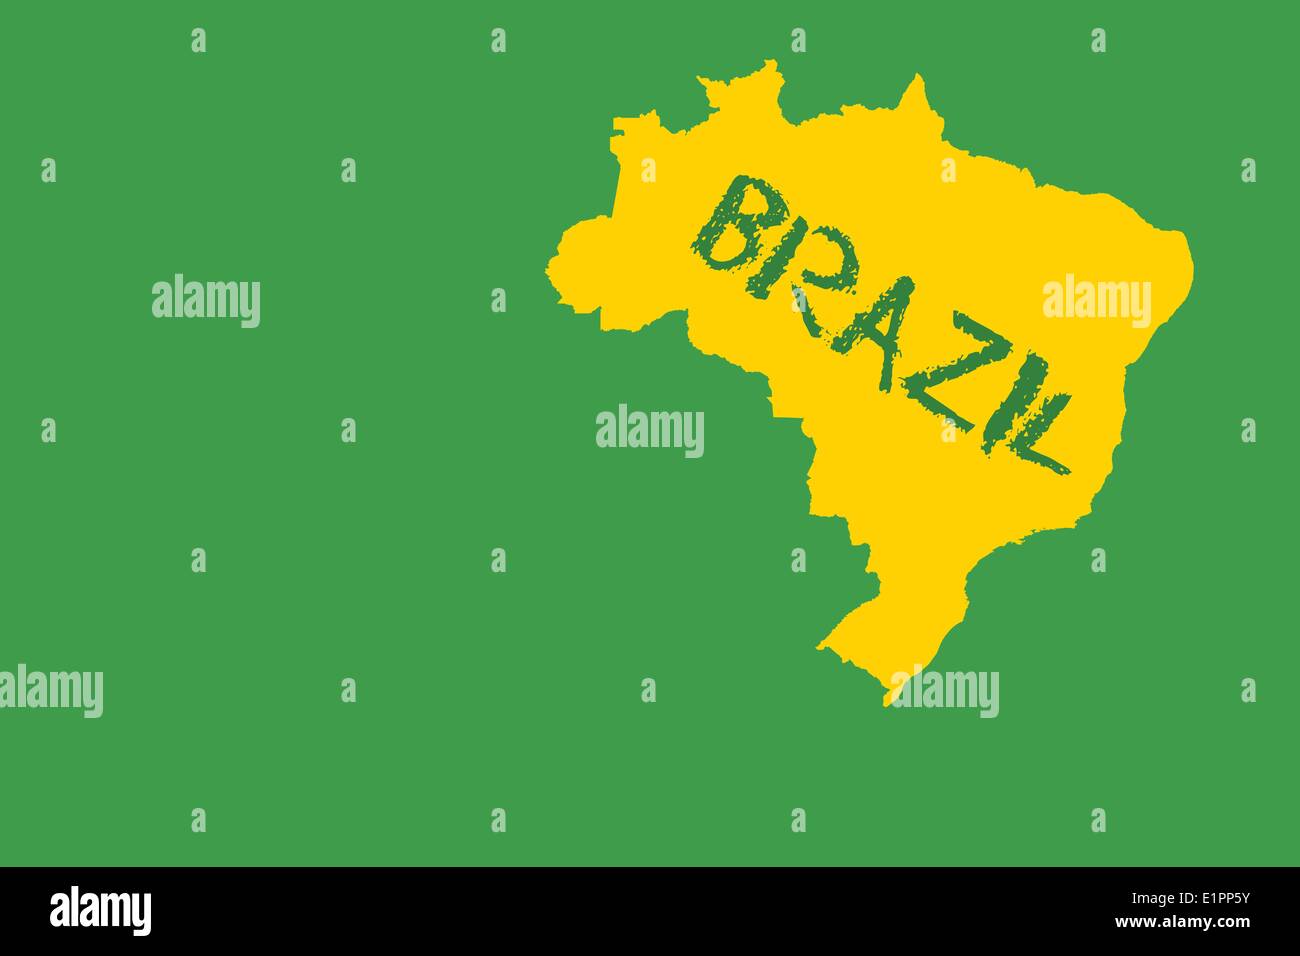 Yellow brazil outline on green with text Stock Photo